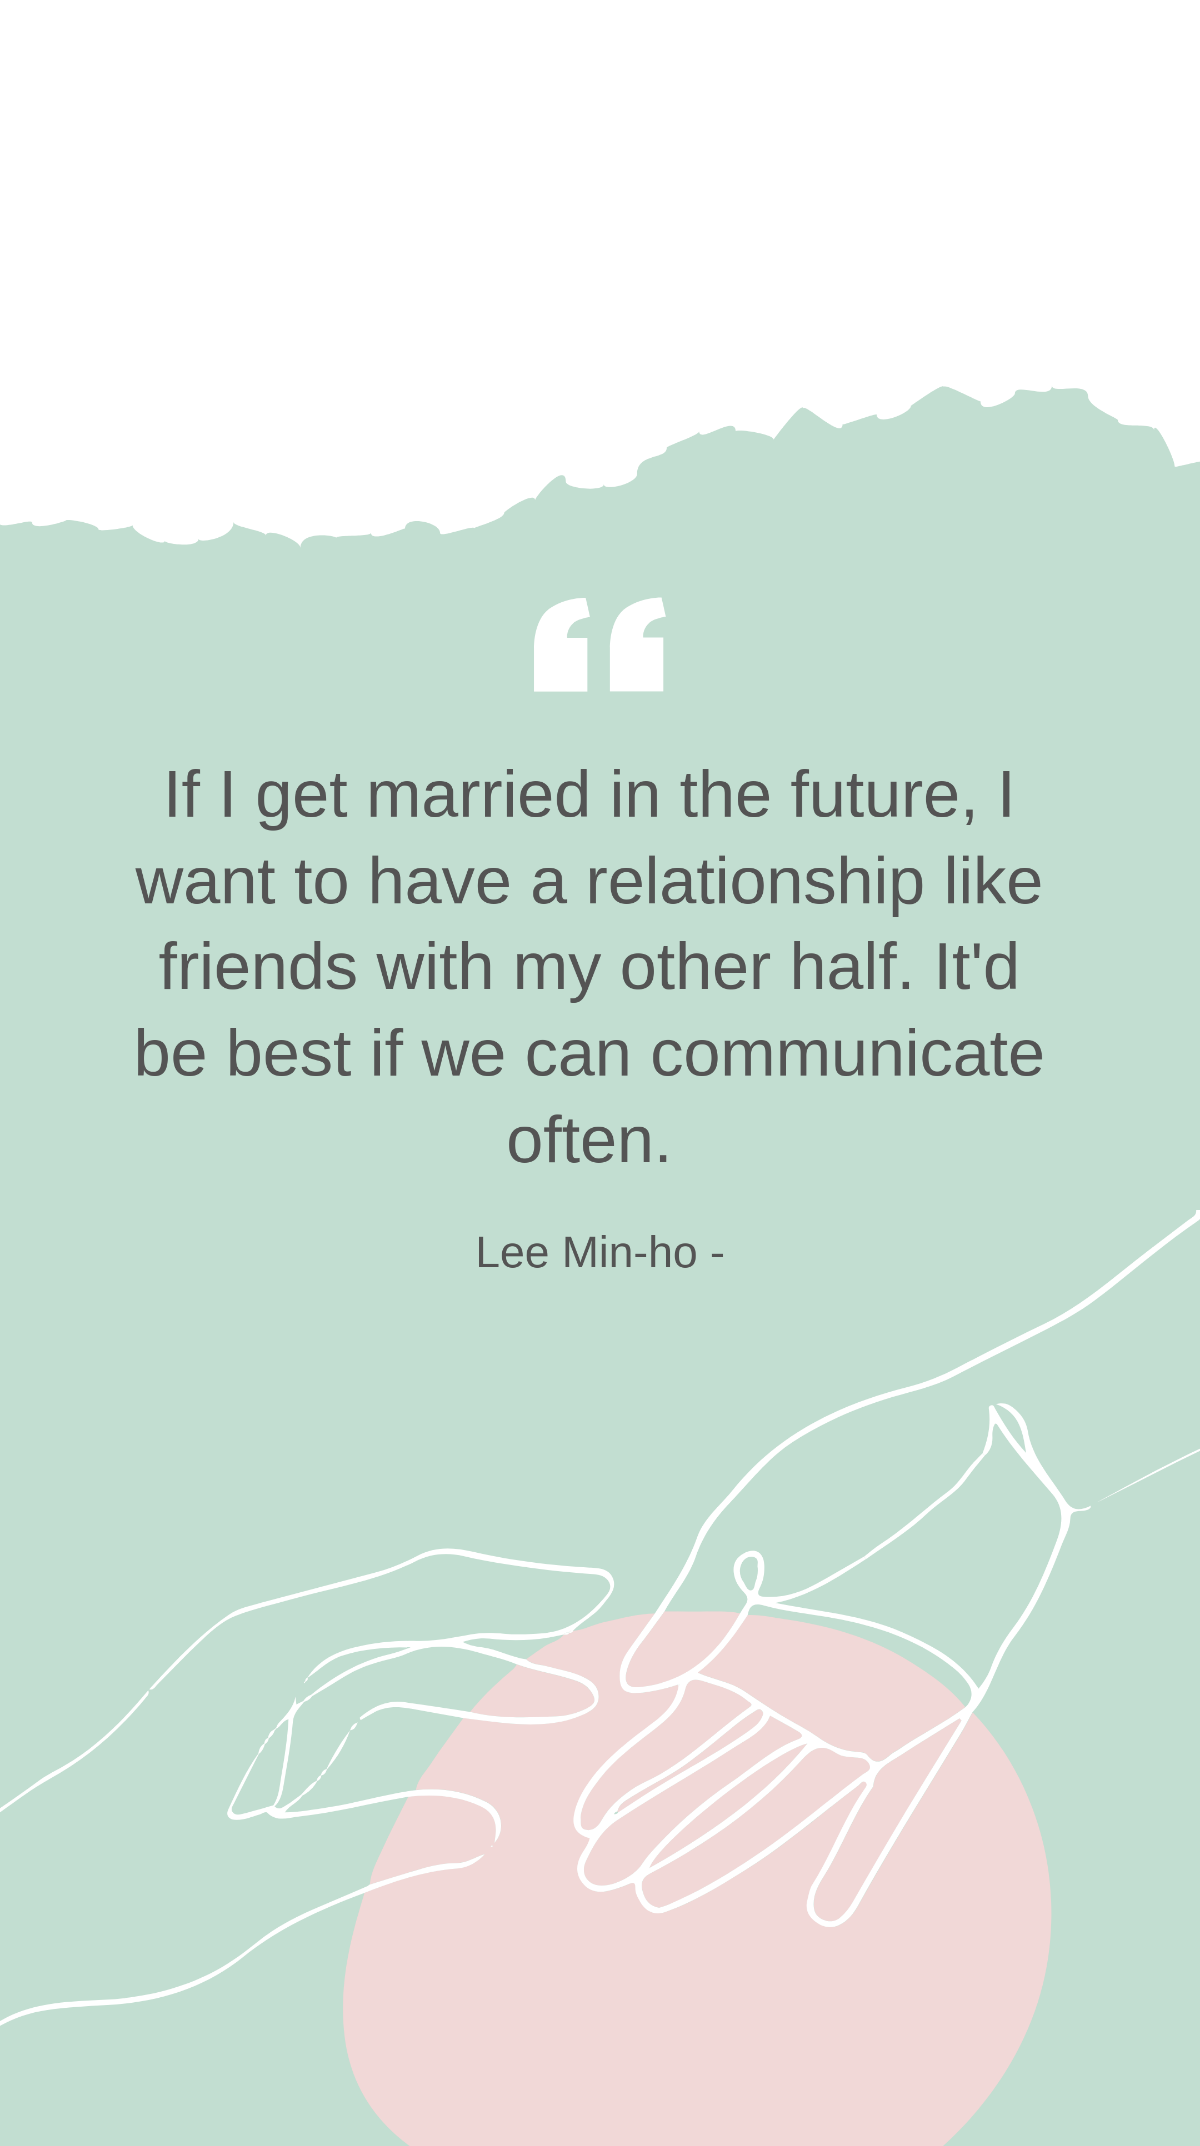 Lee Min-ho - If I get married in the future, I want to have a relationship like friends with my other half. It'd be best if we can communicate often. Template